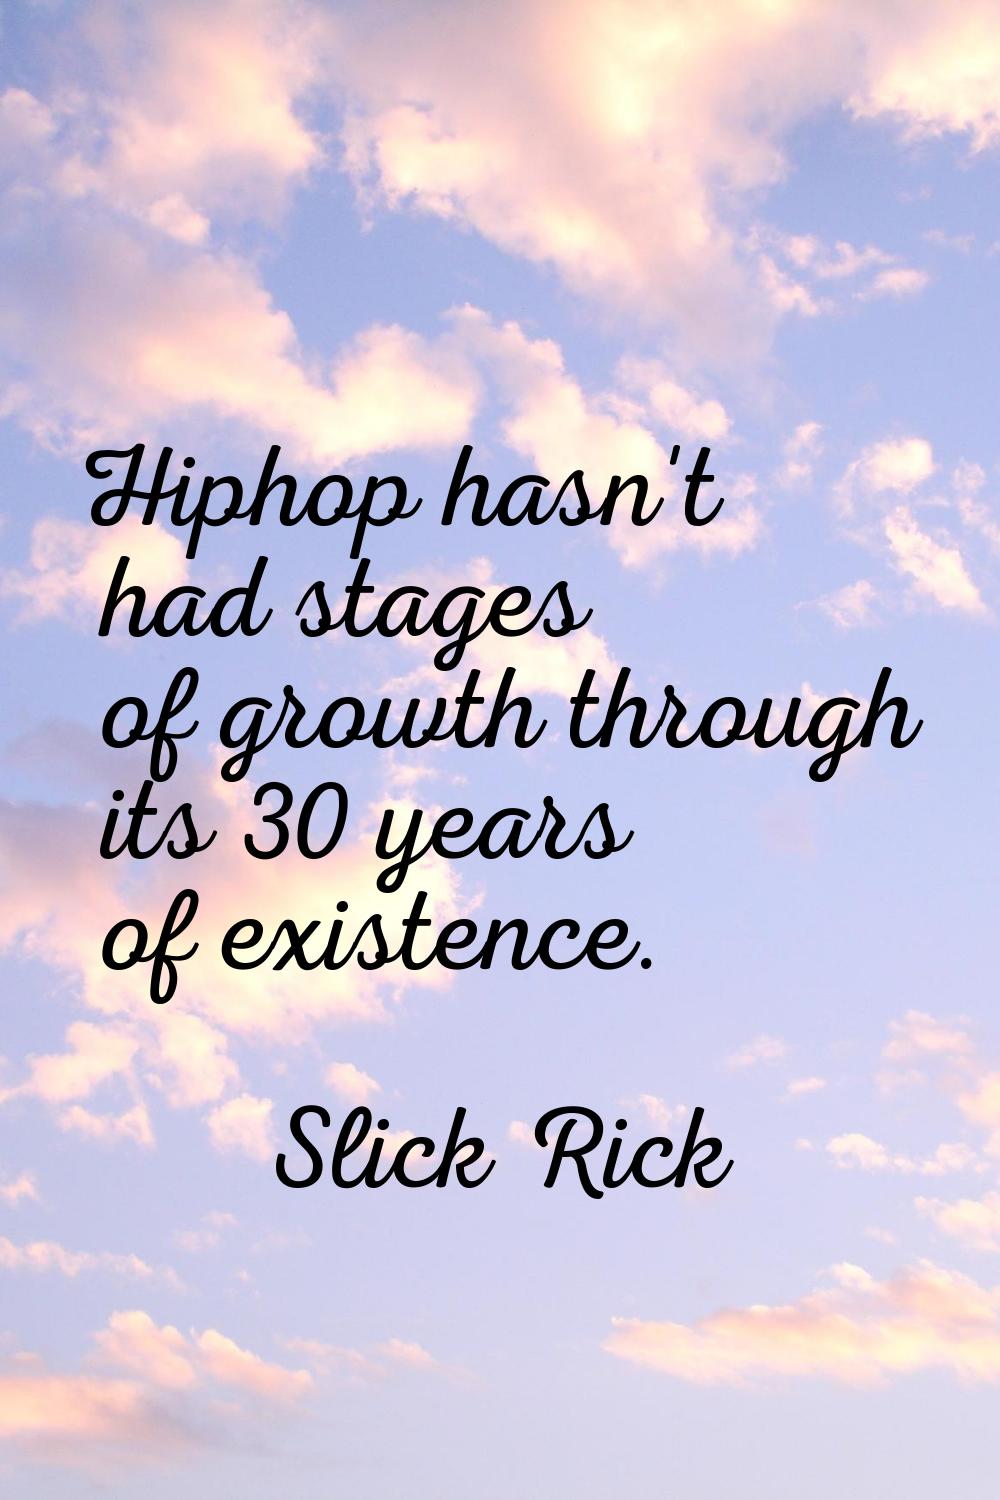 Hiphop hasn't had stages of growth through its 30 years of existence.